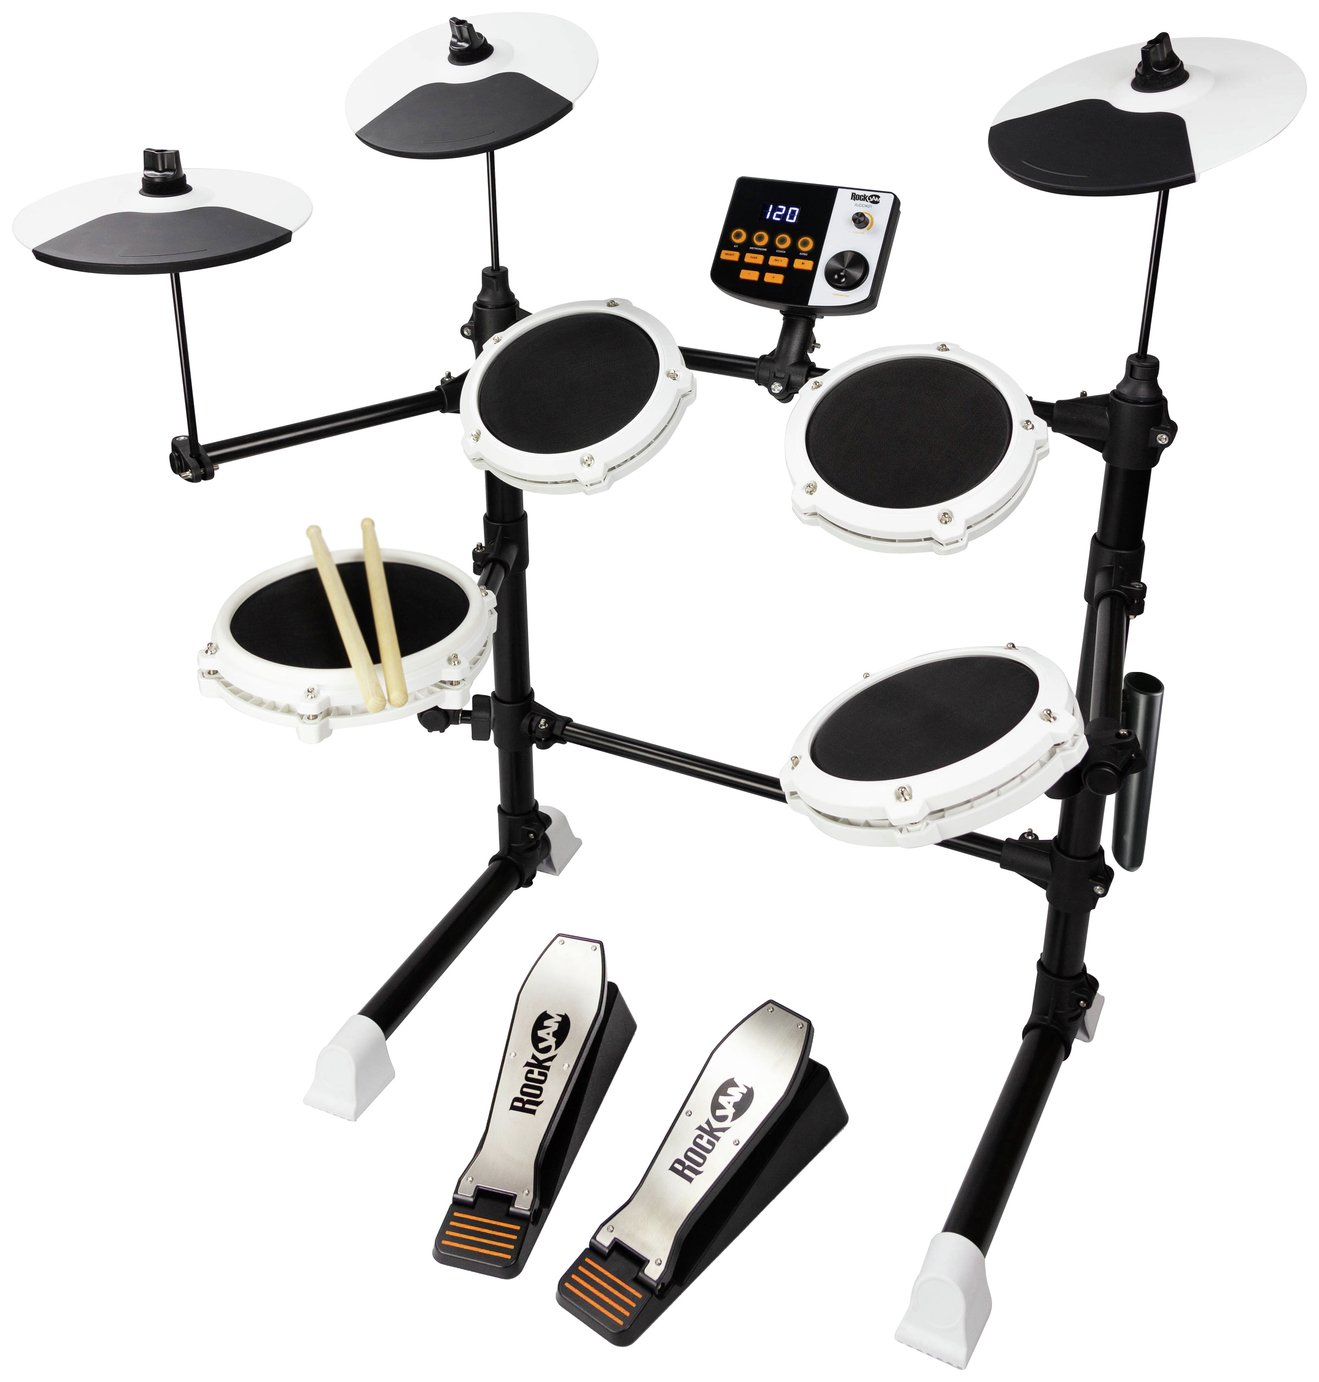 RockJam Electronic Drum Kit With Mesh Heads